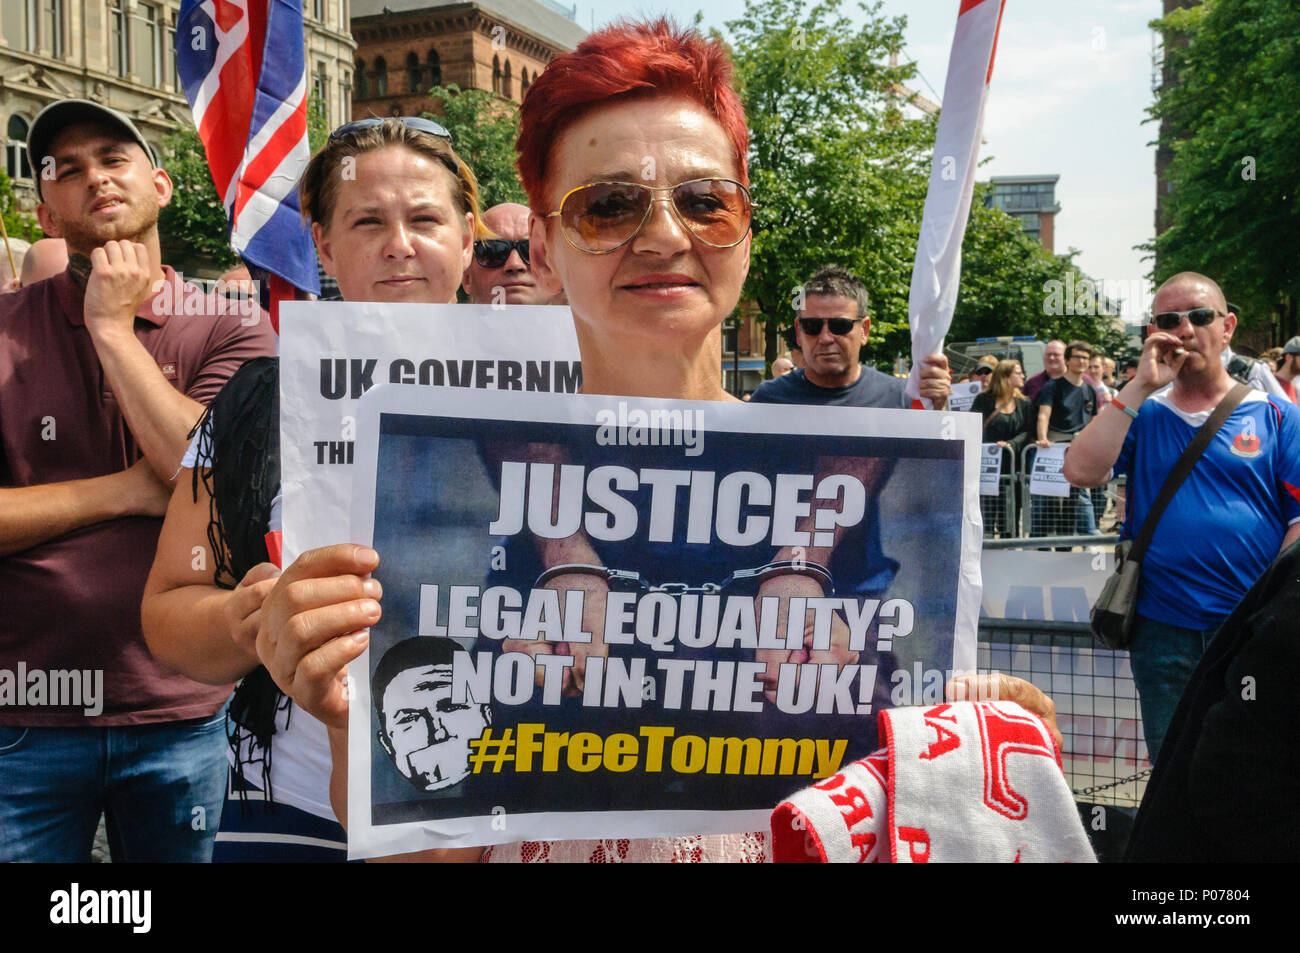 Belfast, Northenrn Ireland, 09/06/2018 - Unionists hold a rally in support of the Britain First member Tommy Robinson who was jailed in May 2018 for 13 months for contempt of court by posting live on Facebook when banned from doing so. Stock Photo